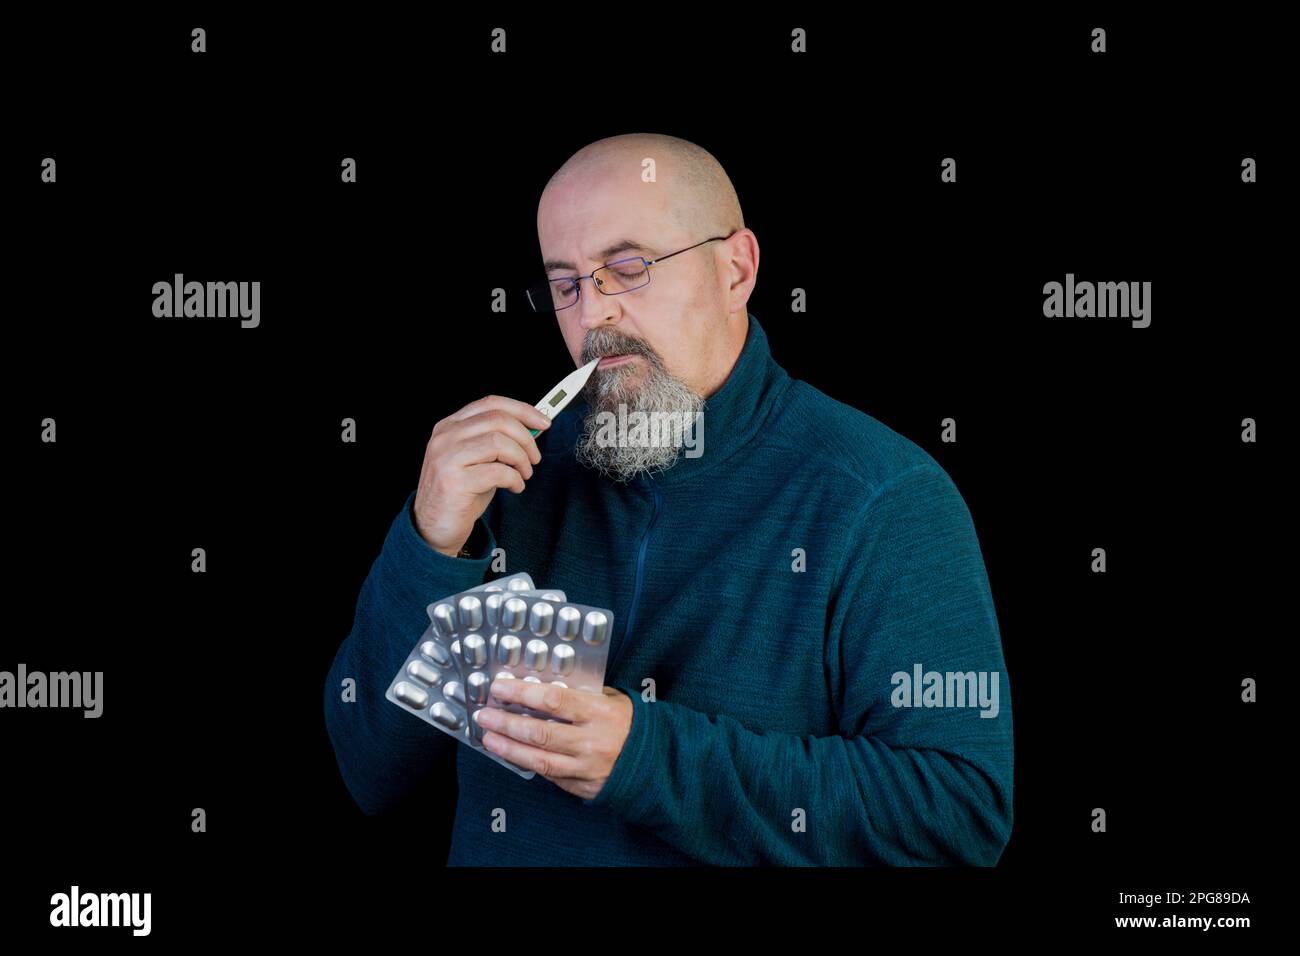 A middle-aged man checking his temperature with a bunch of pills in his hands, isolated on black background Stock Photo